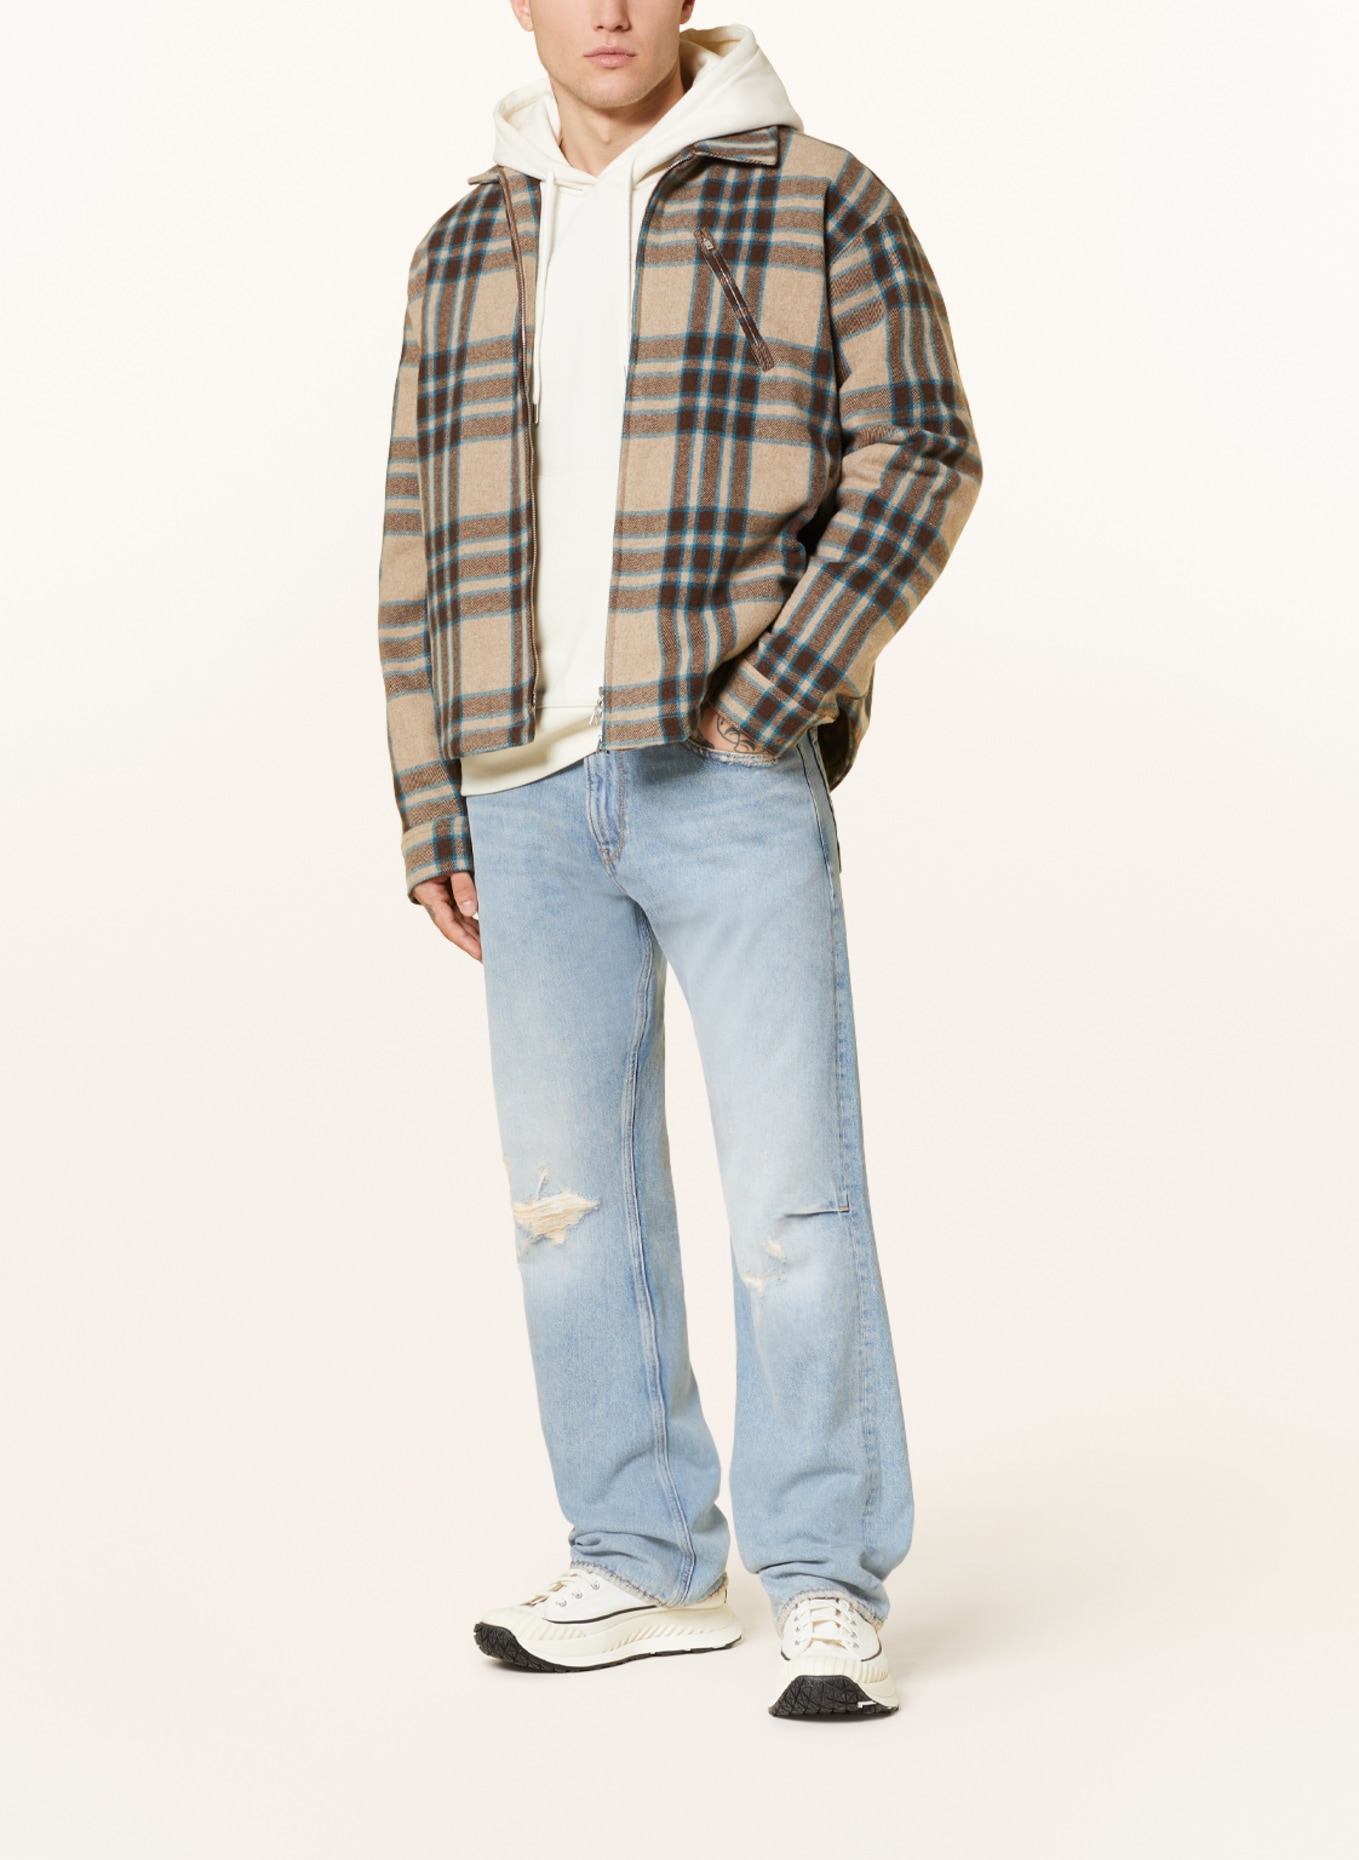 G-Star RAW Destroyed Jeans LENNEY BOOTCUT Regular Fit, Farbe: G672 sun faded ripped fogbow (Bild 2)